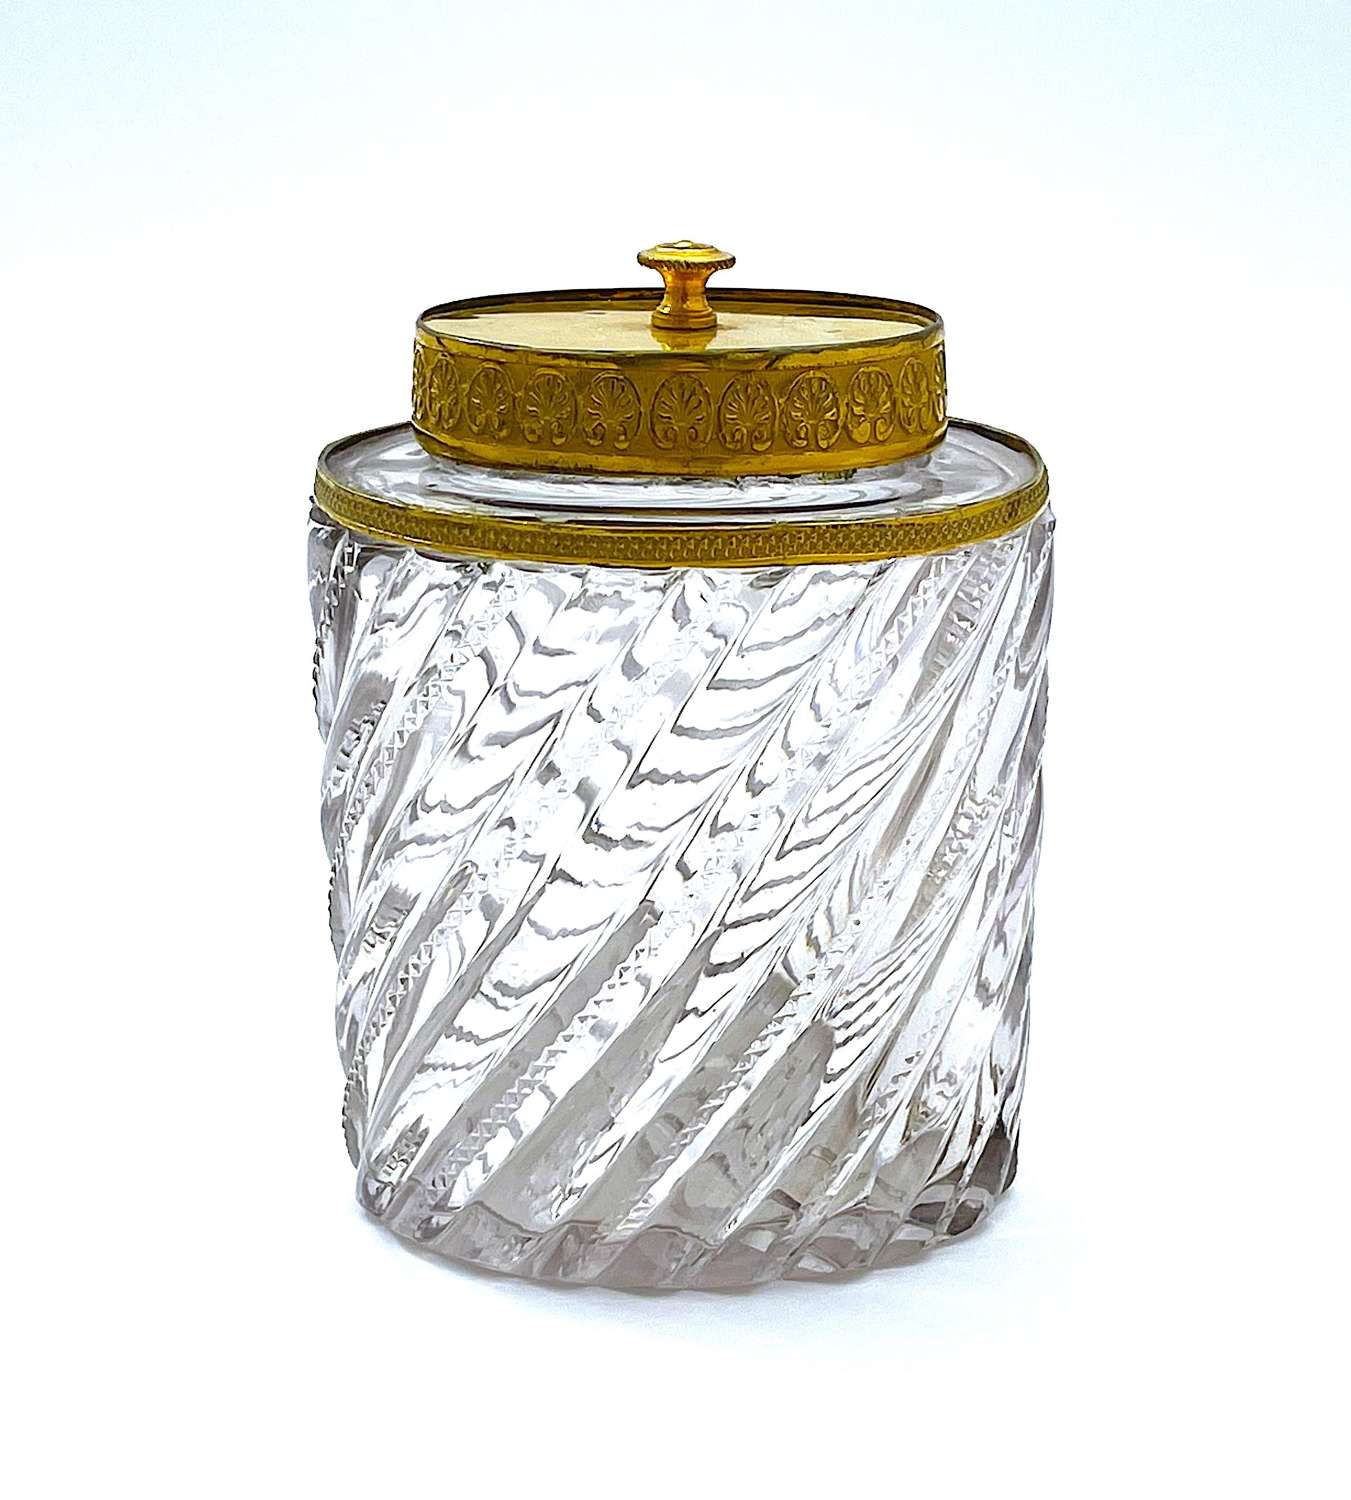 Exquisite Antique French Cylindrical-Shaped Cut Crystal Box.